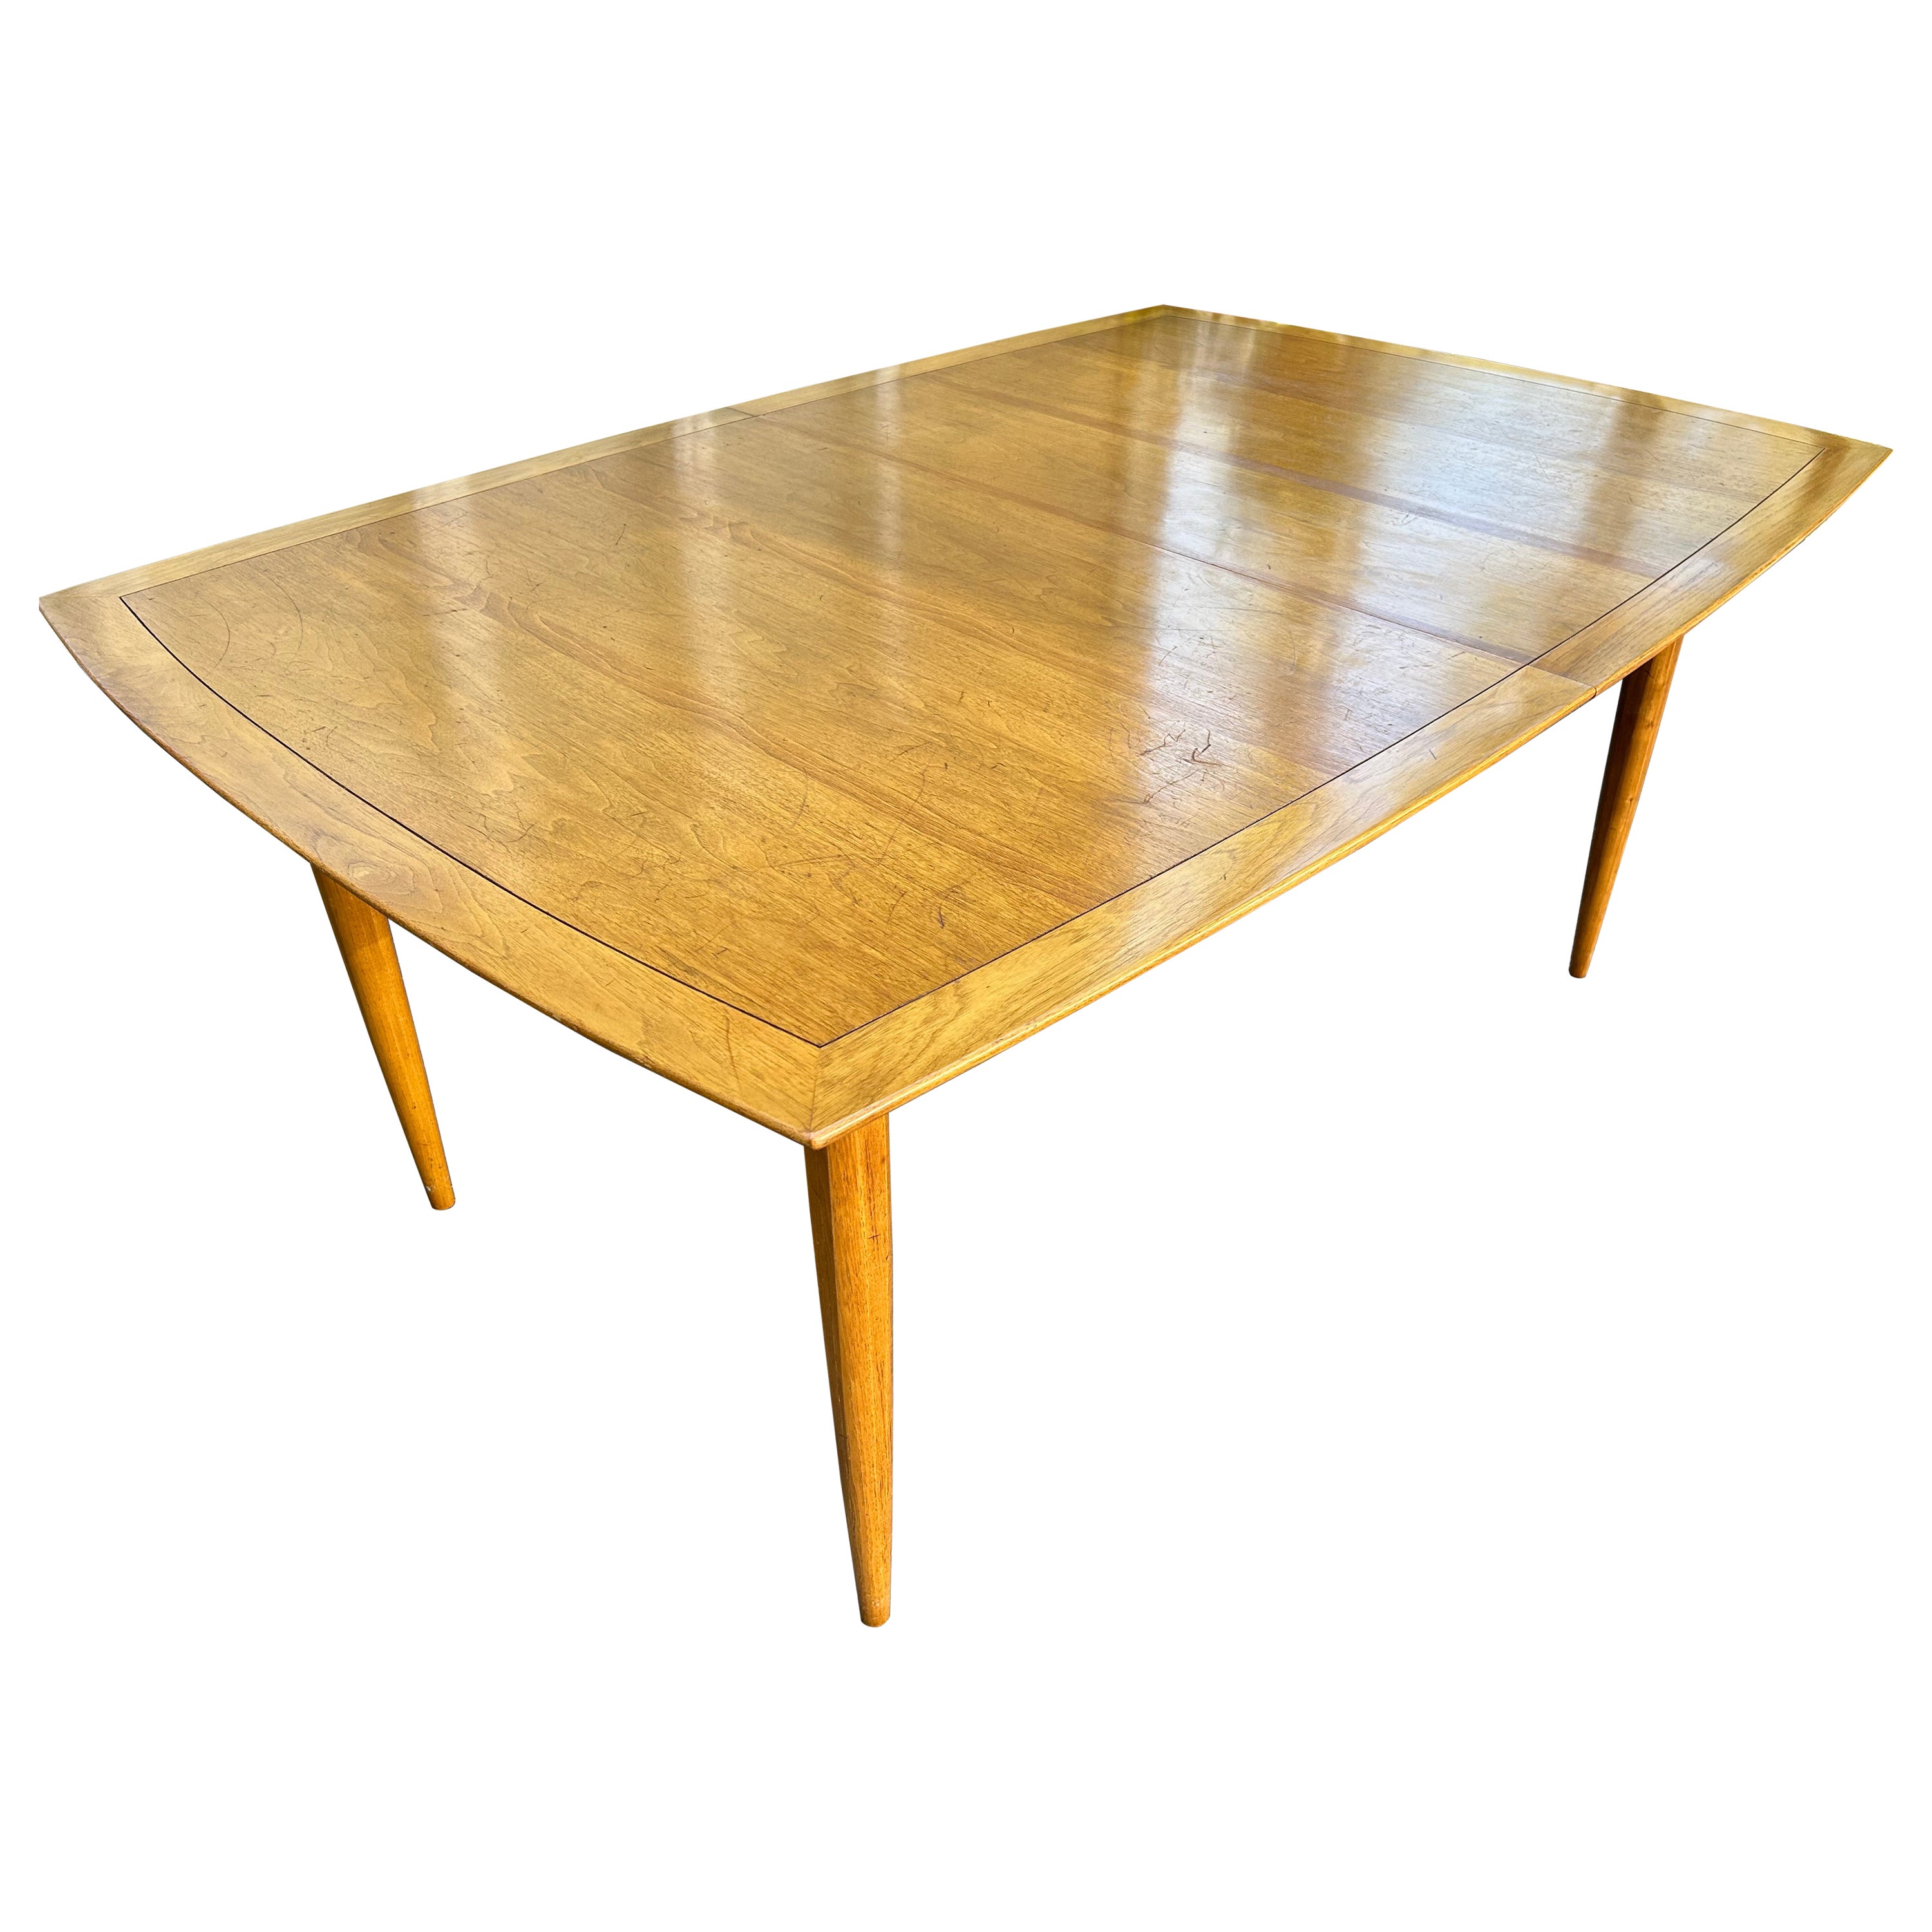 Gorgeous Tomlinson Sophisticate Dining Table Mid-Century Modern